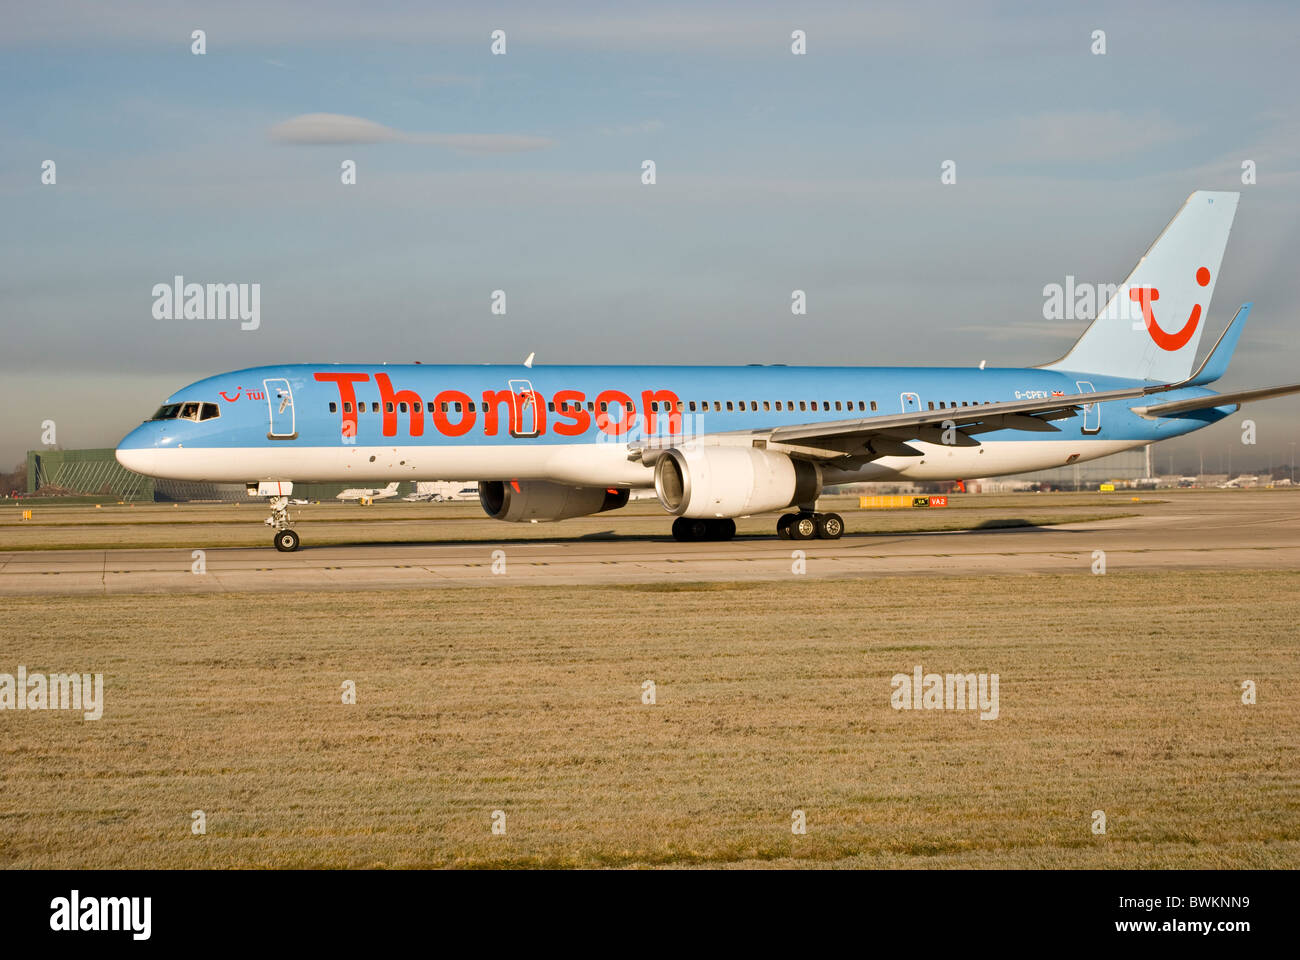 thomson boeing 757 airplane ready for take off at Manchester ringway airport runway Stock Photo